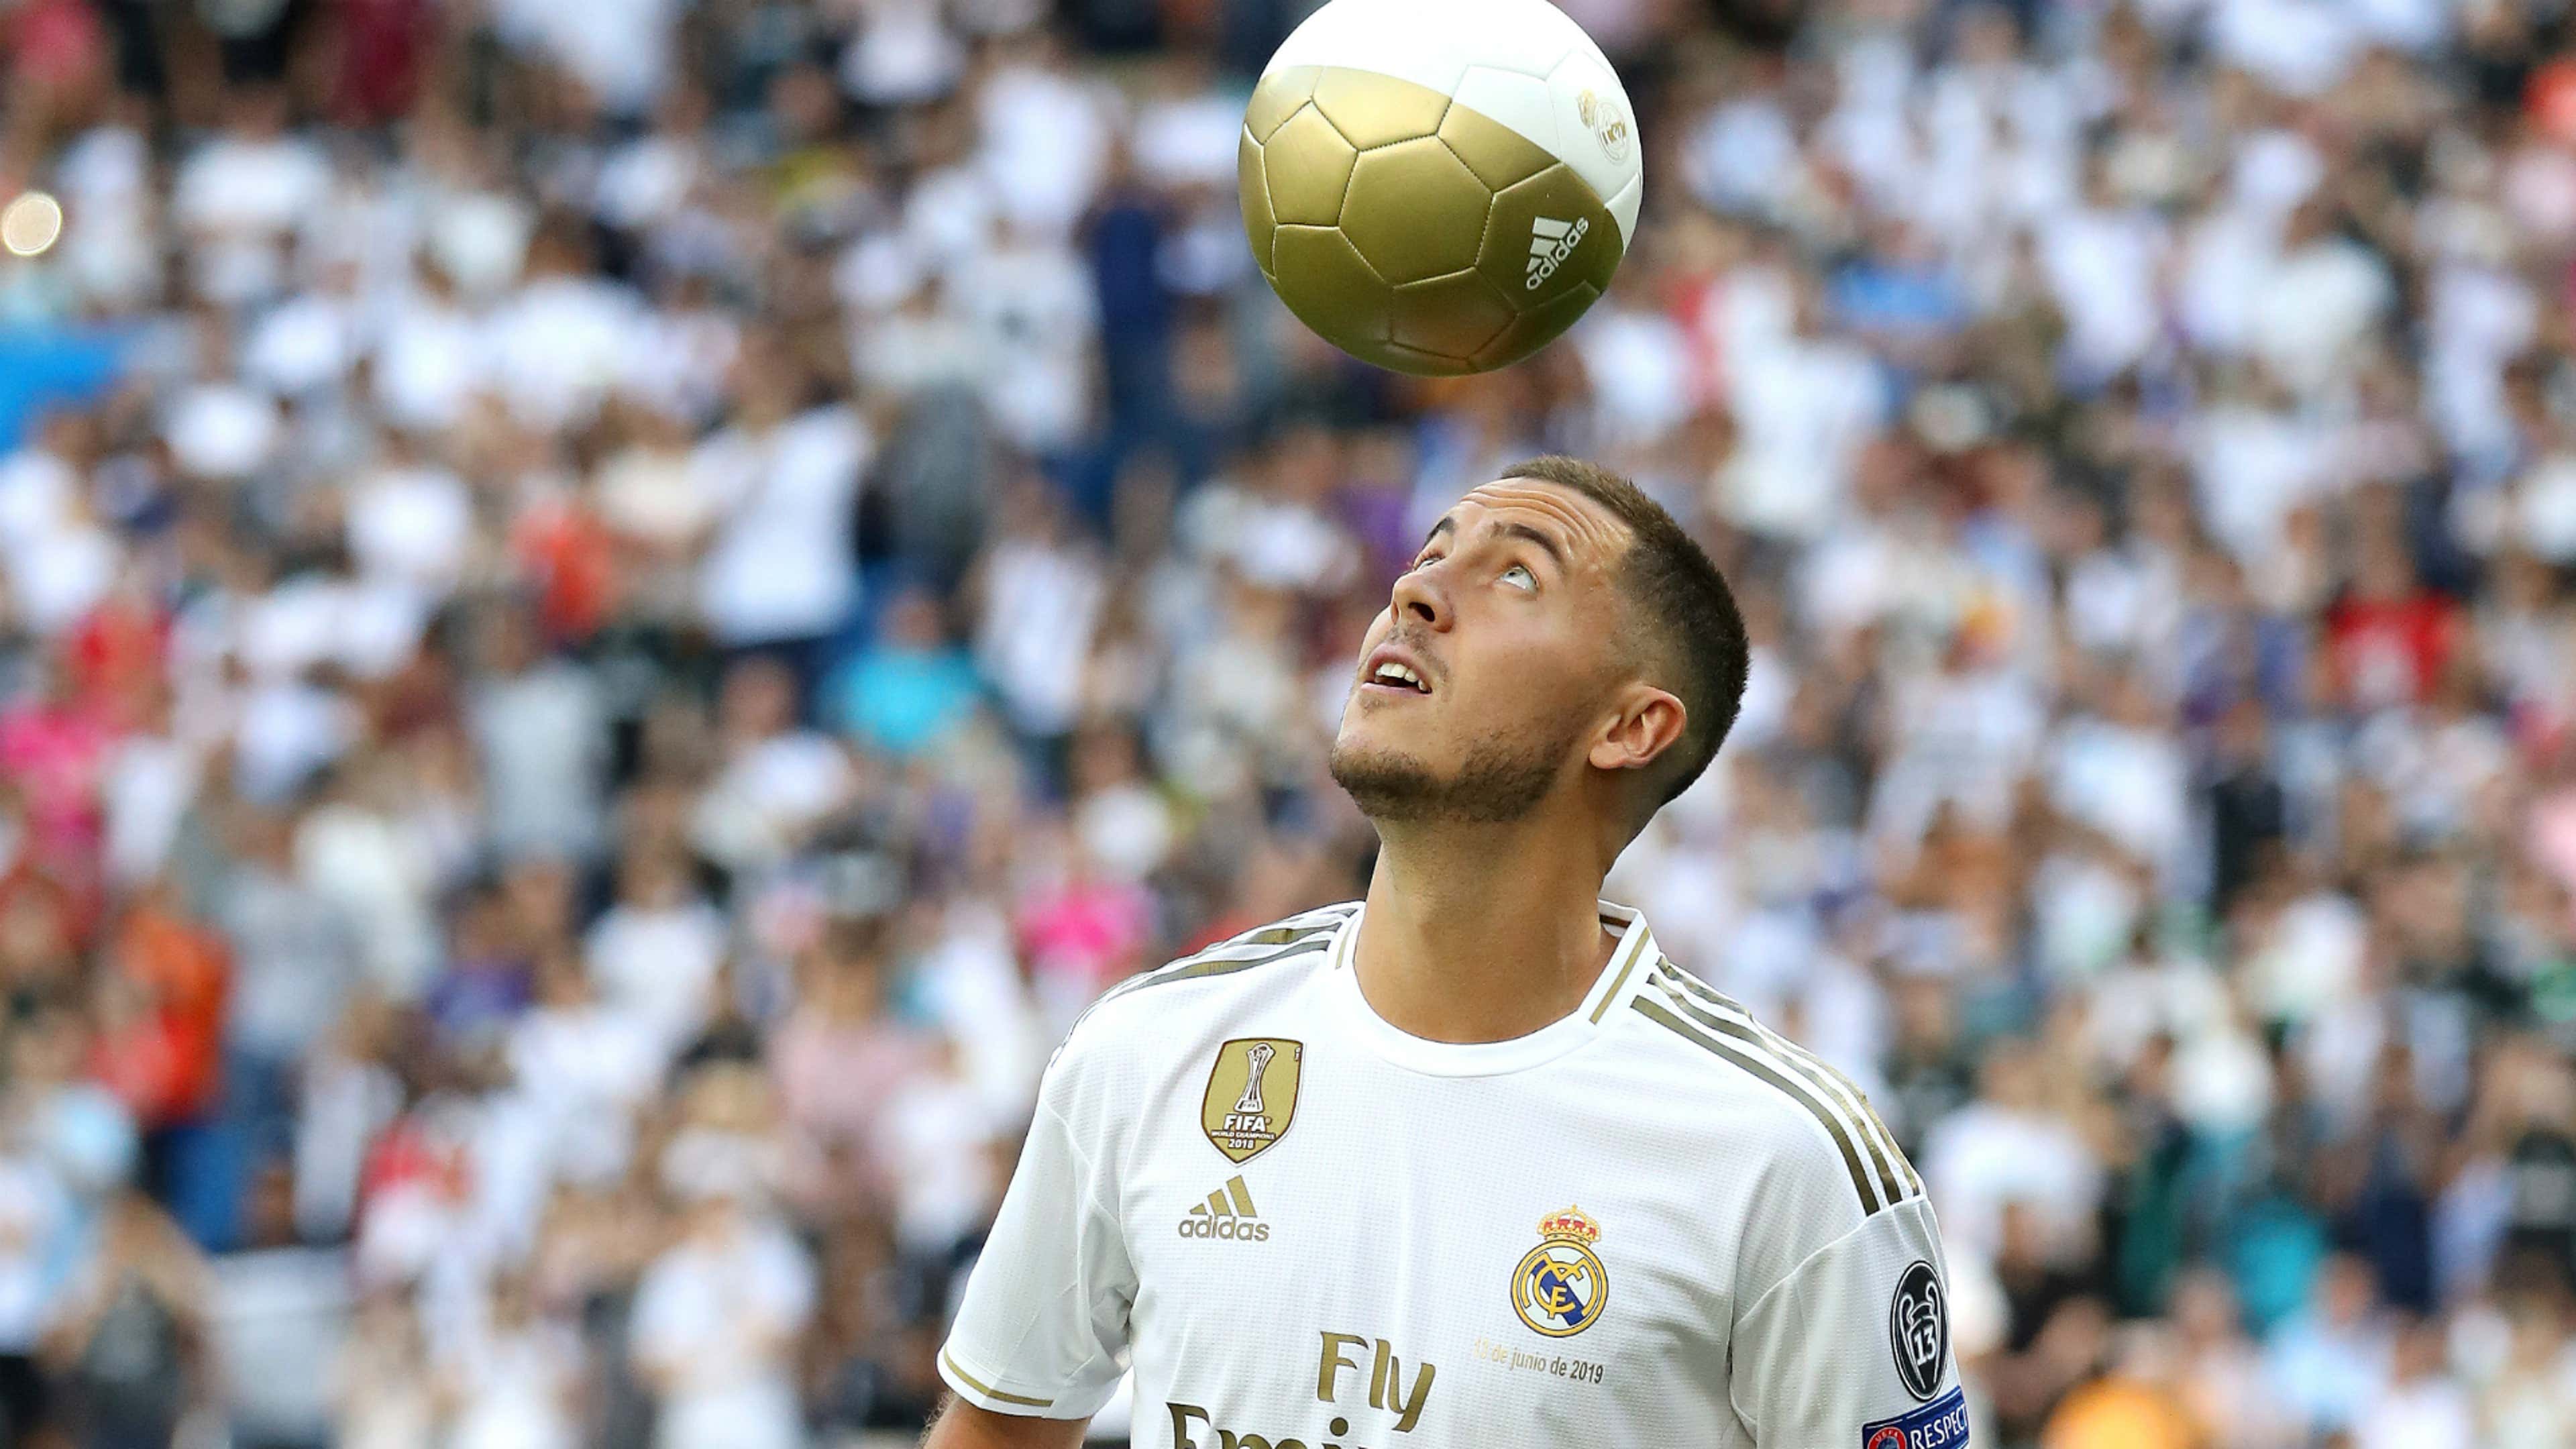 Chelsea hero Eden Hazard lined up for shock transfer but faces huge pay cut  